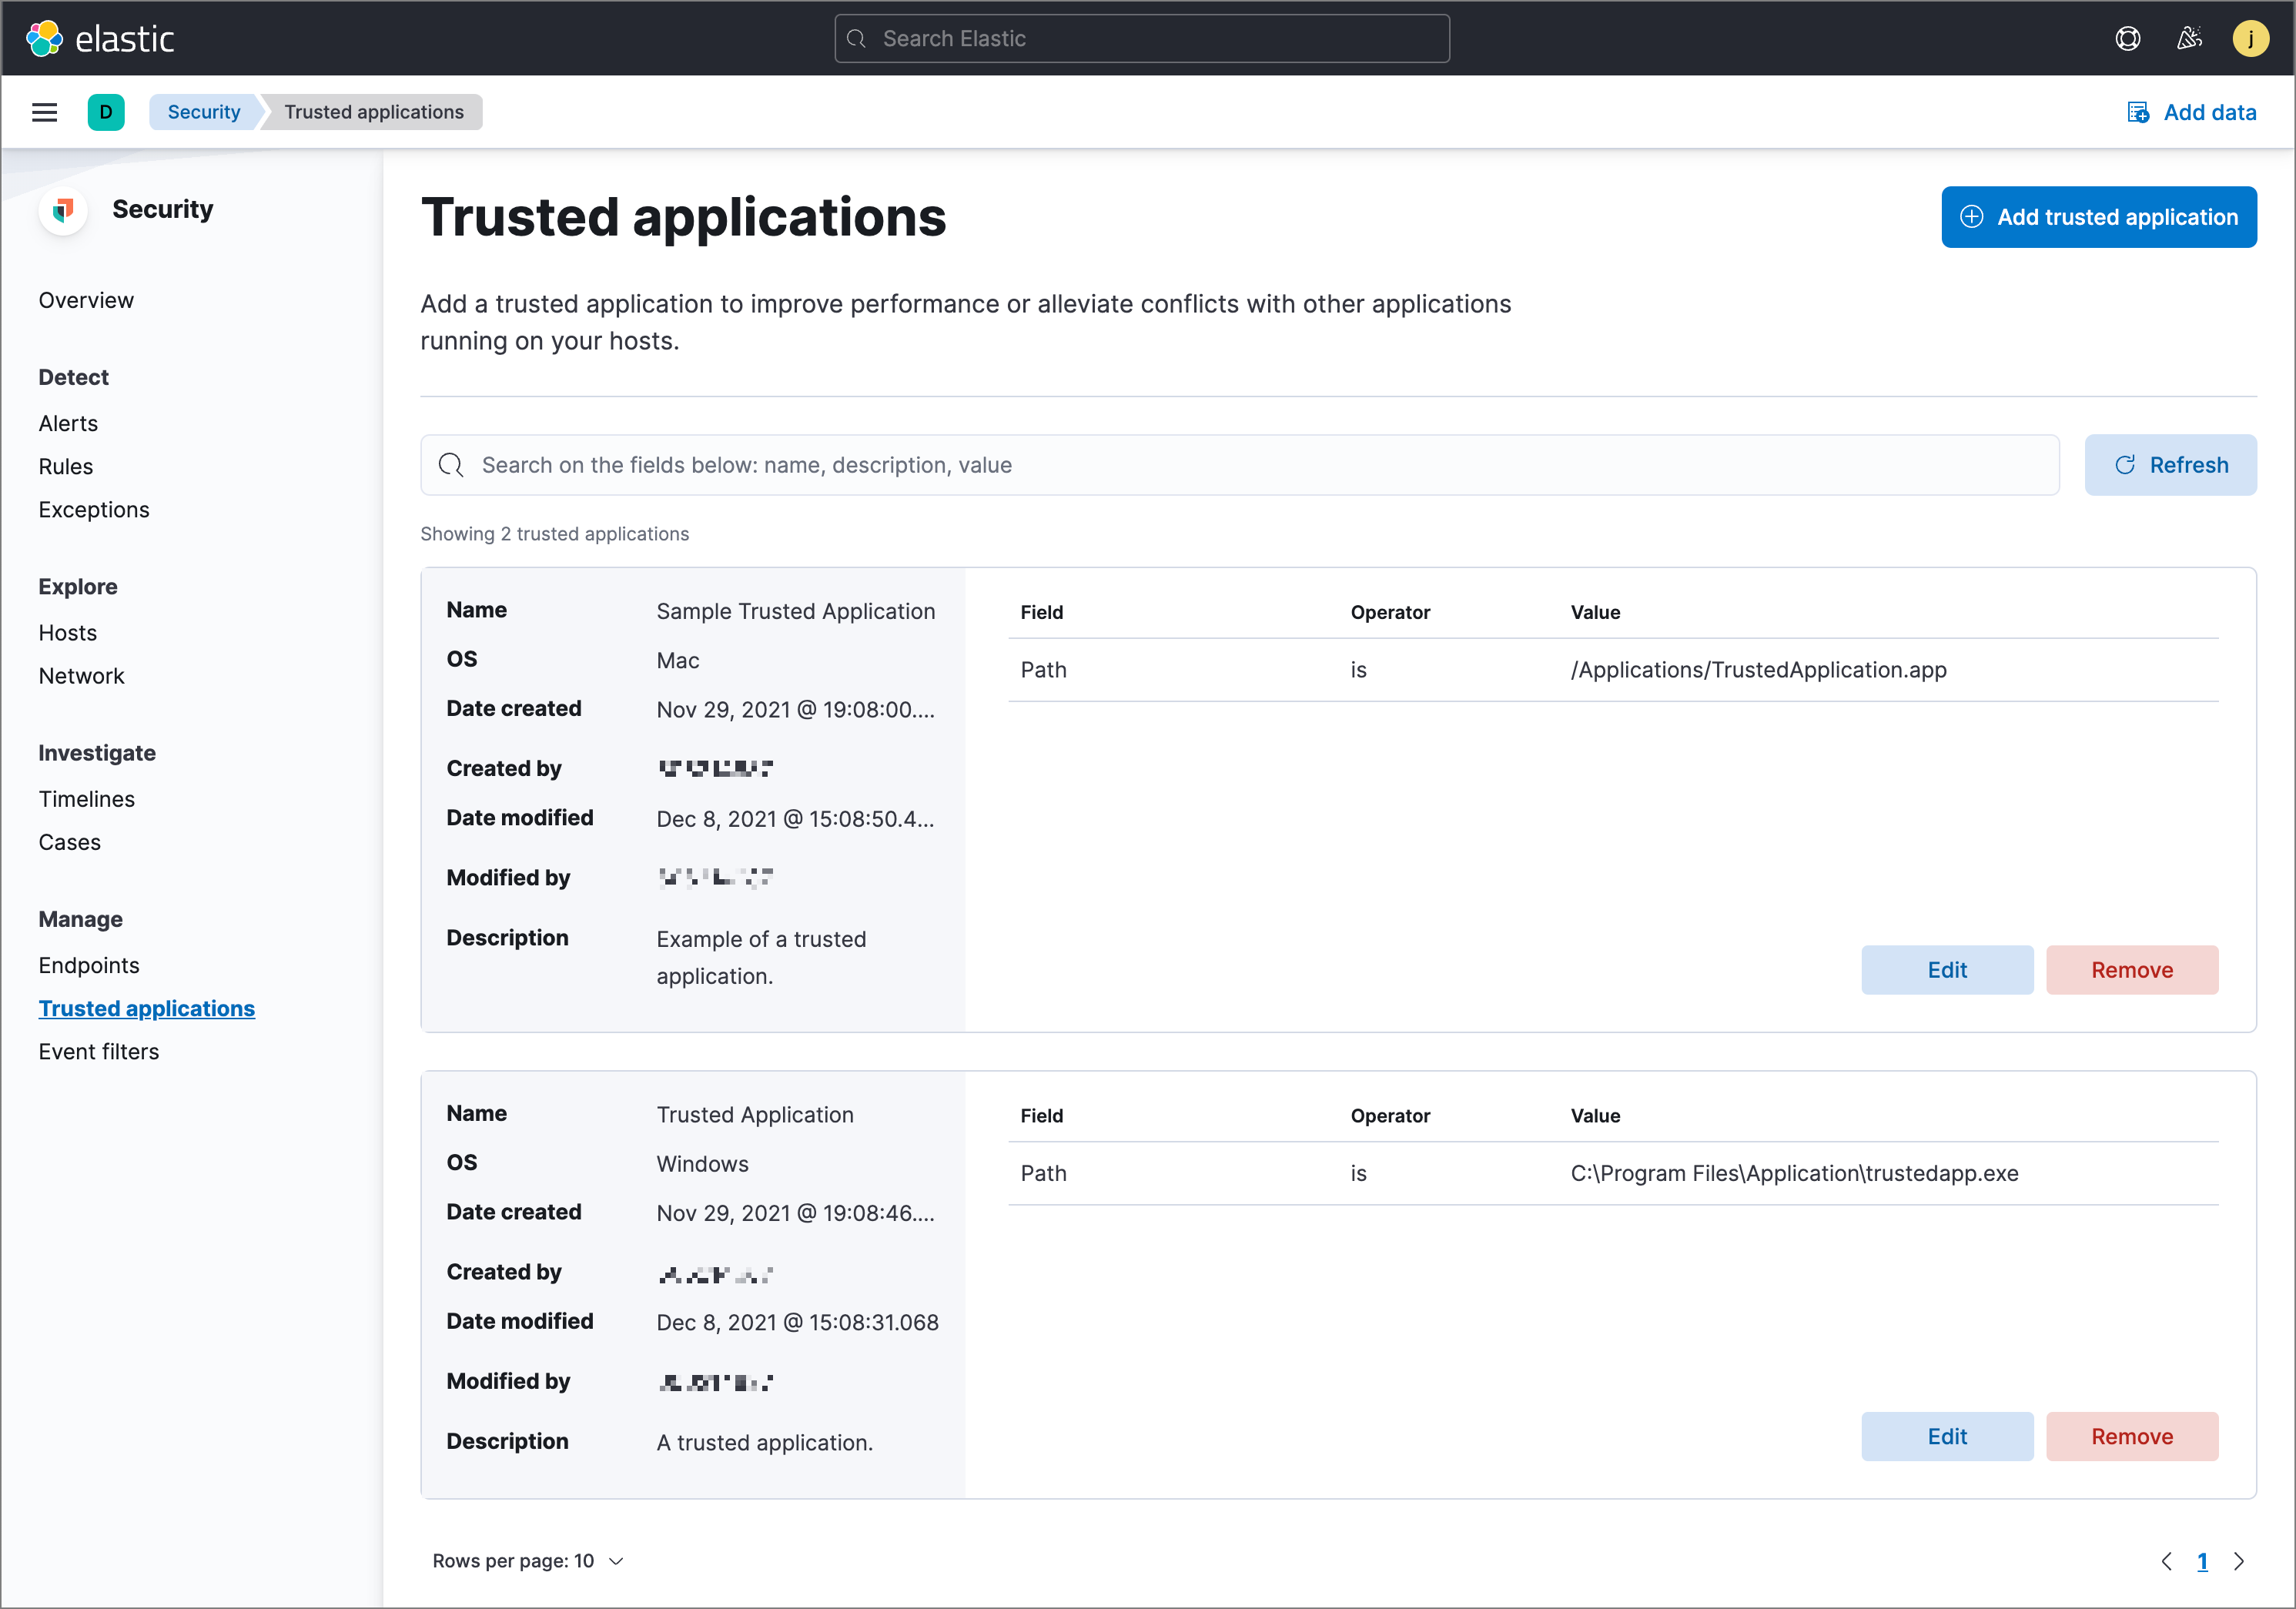 Shows the Trusted applications page